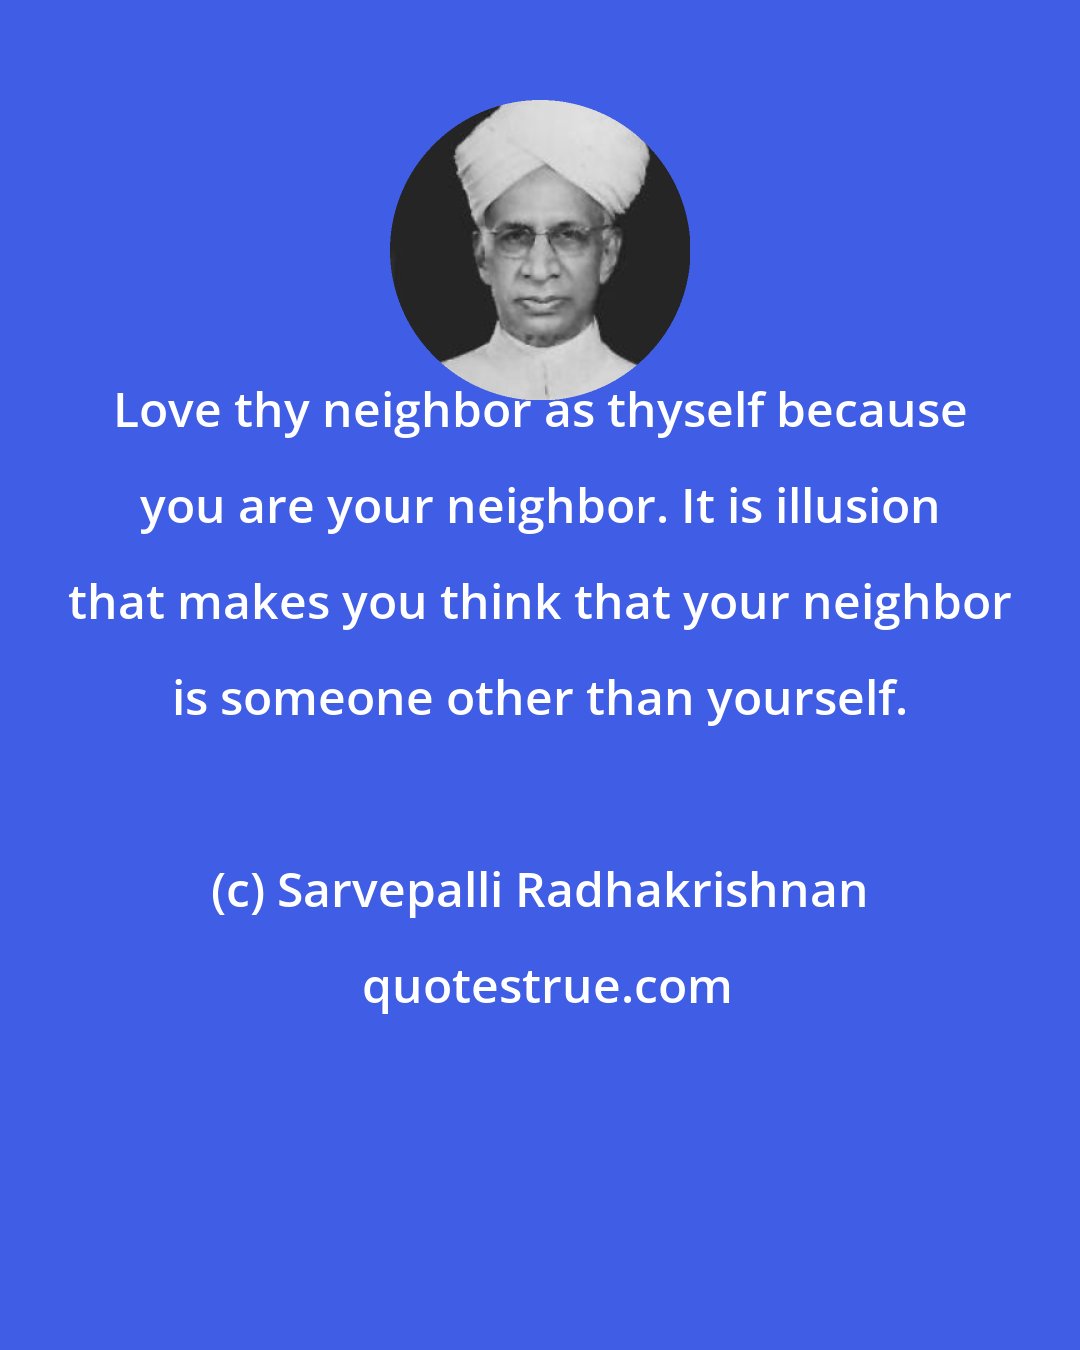 Sarvepalli Radhakrishnan: Love thy neighbor as thyself because you are your neighbor. It is illusion that makes you think that your neighbor is someone other than yourself.